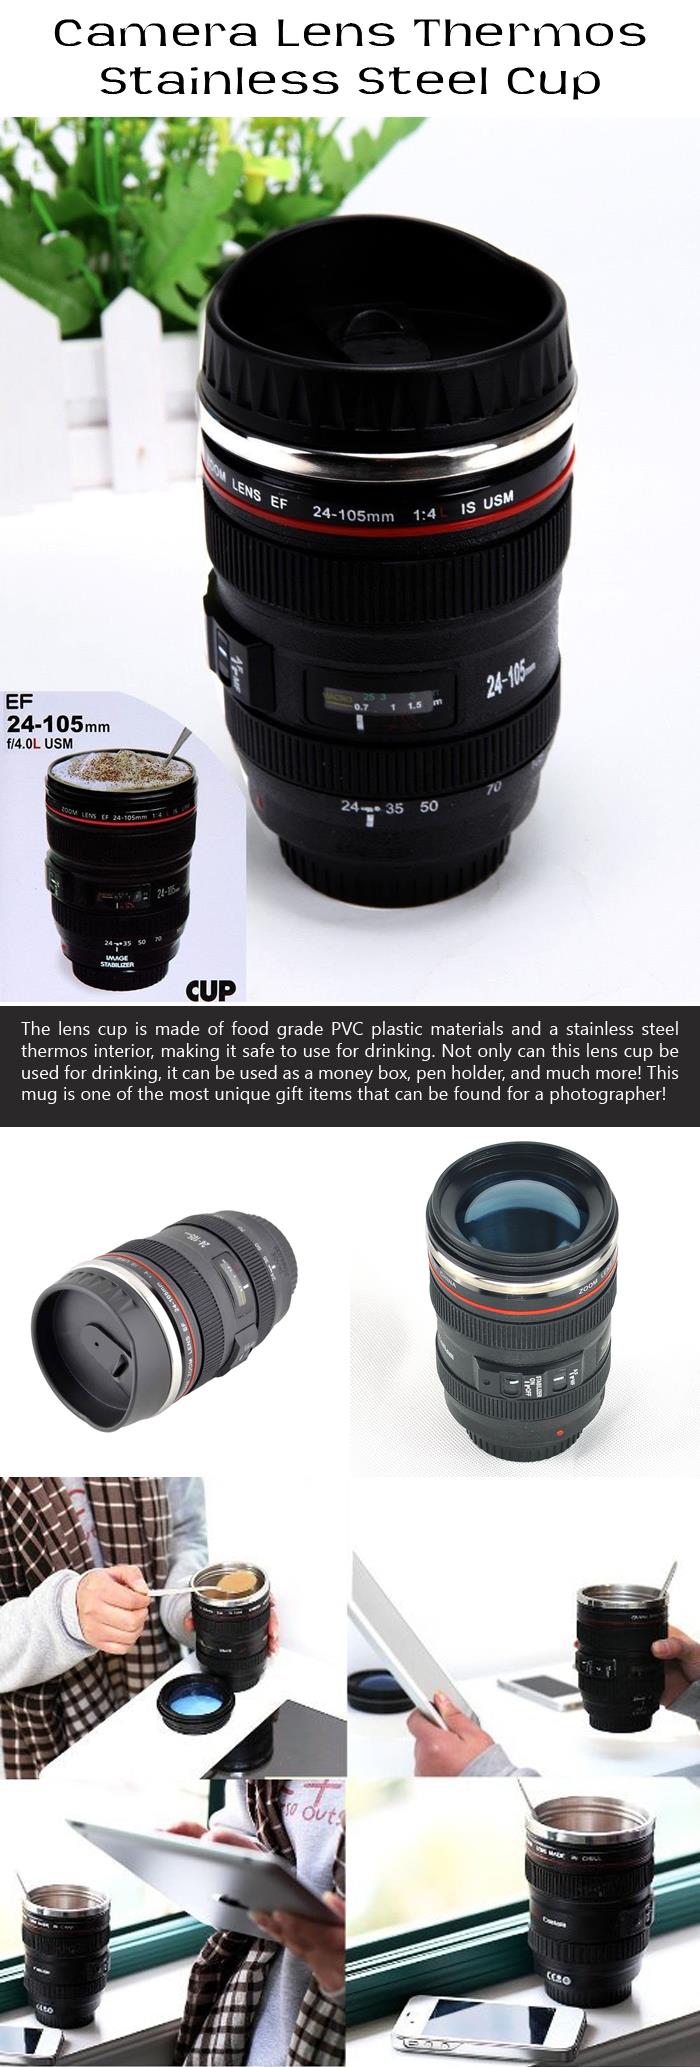 Camera Lens Thermos Stainless Steel Cup